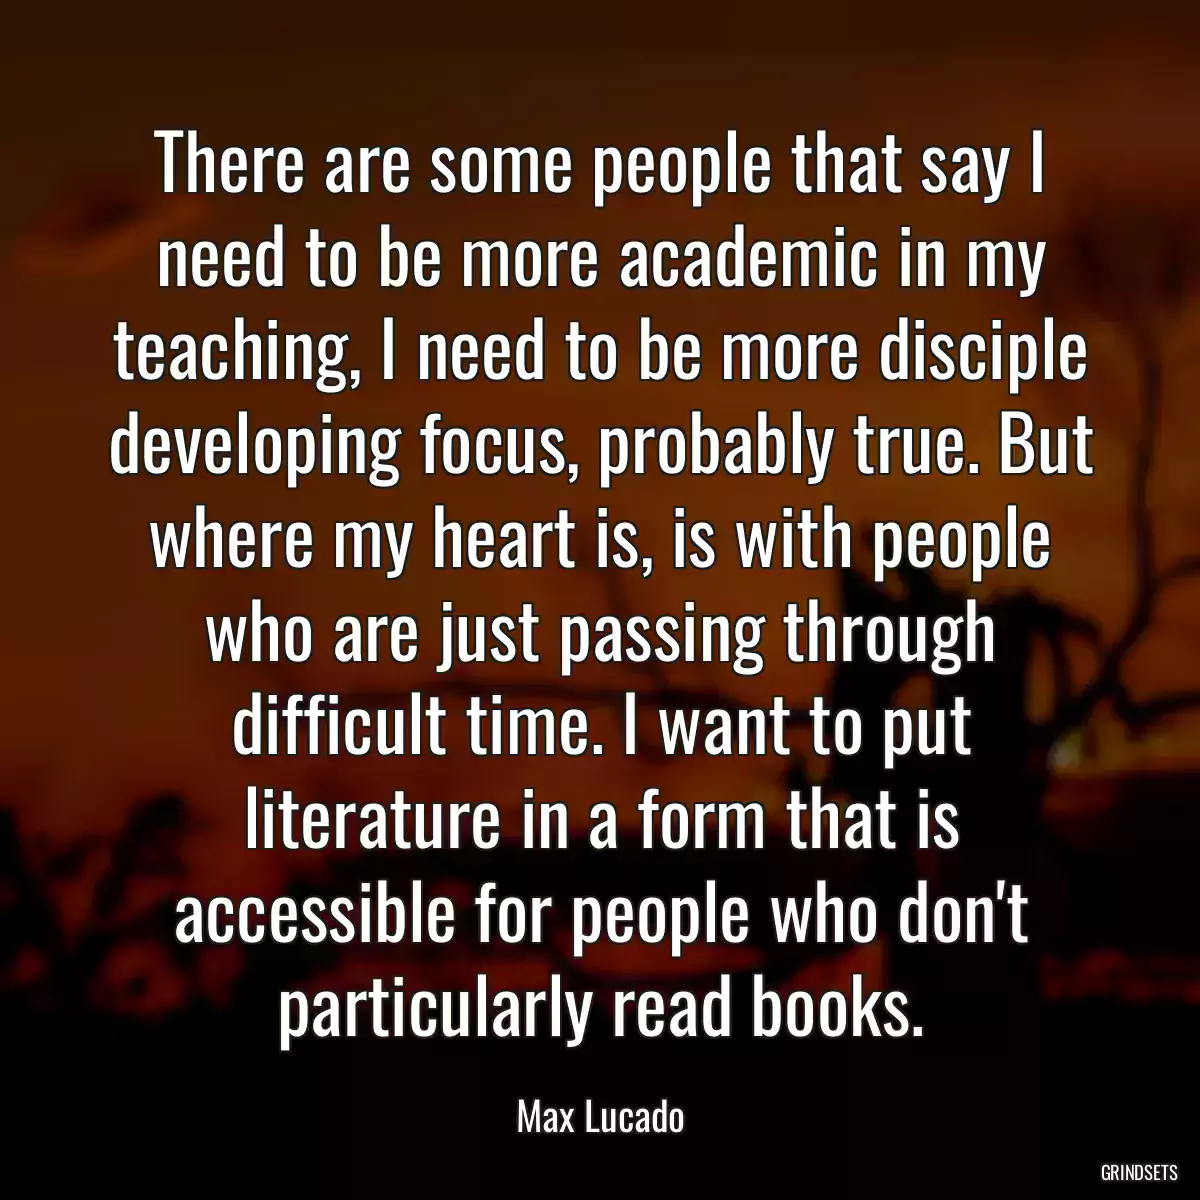 There are some people that say I need to be more academic in my teaching, I need to be more disciple developing focus, probably true. But where my heart is, is with people who are just passing through difficult time. I want to put literature in a form that is accessible for people who don\'t particularly read books.